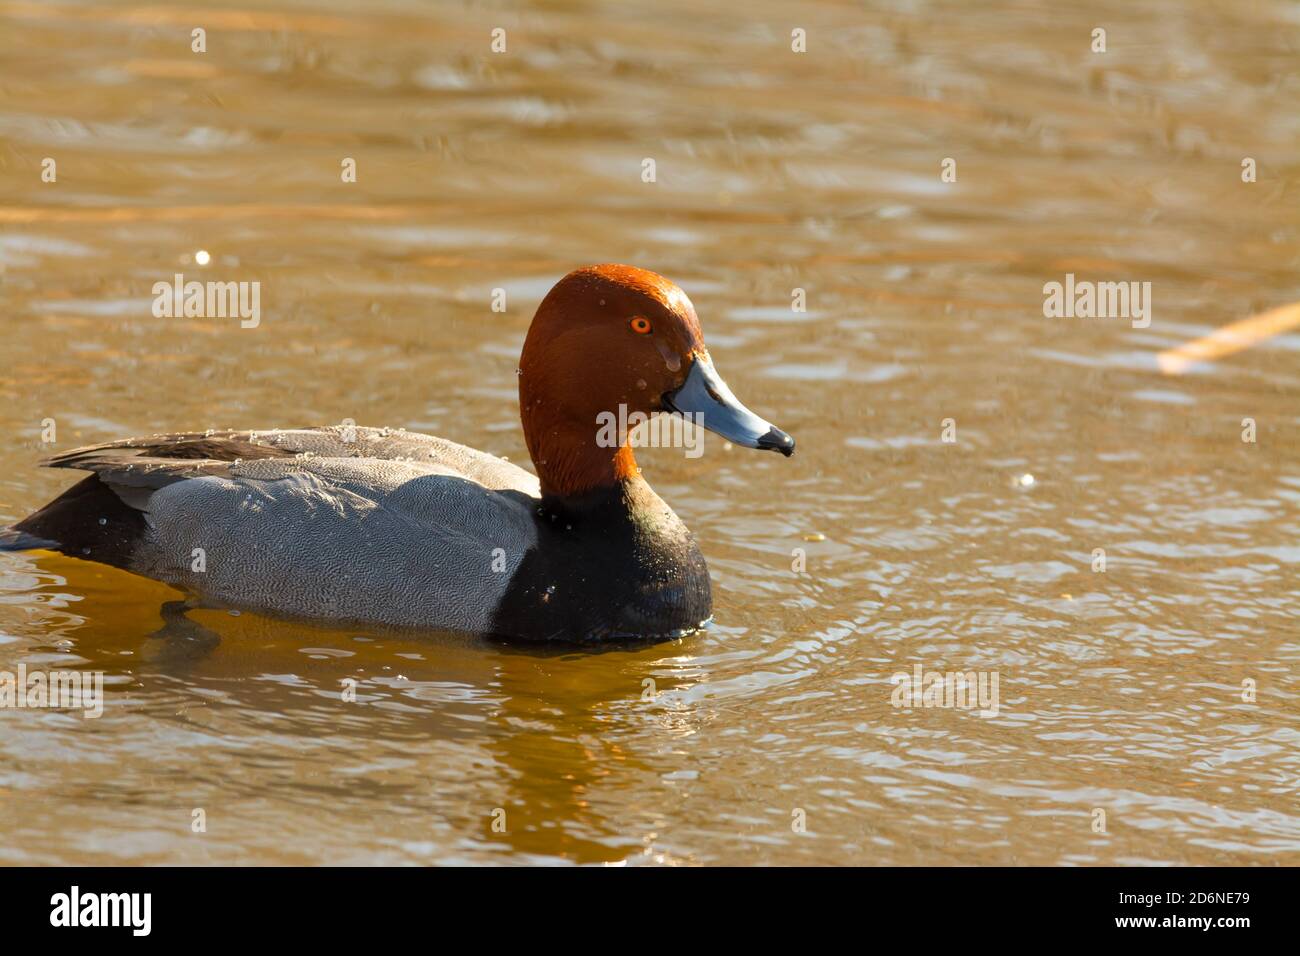 A male redhead duck, Aythya americana, swimming in a wetland pond in central Alberta, Canada Stock Photo